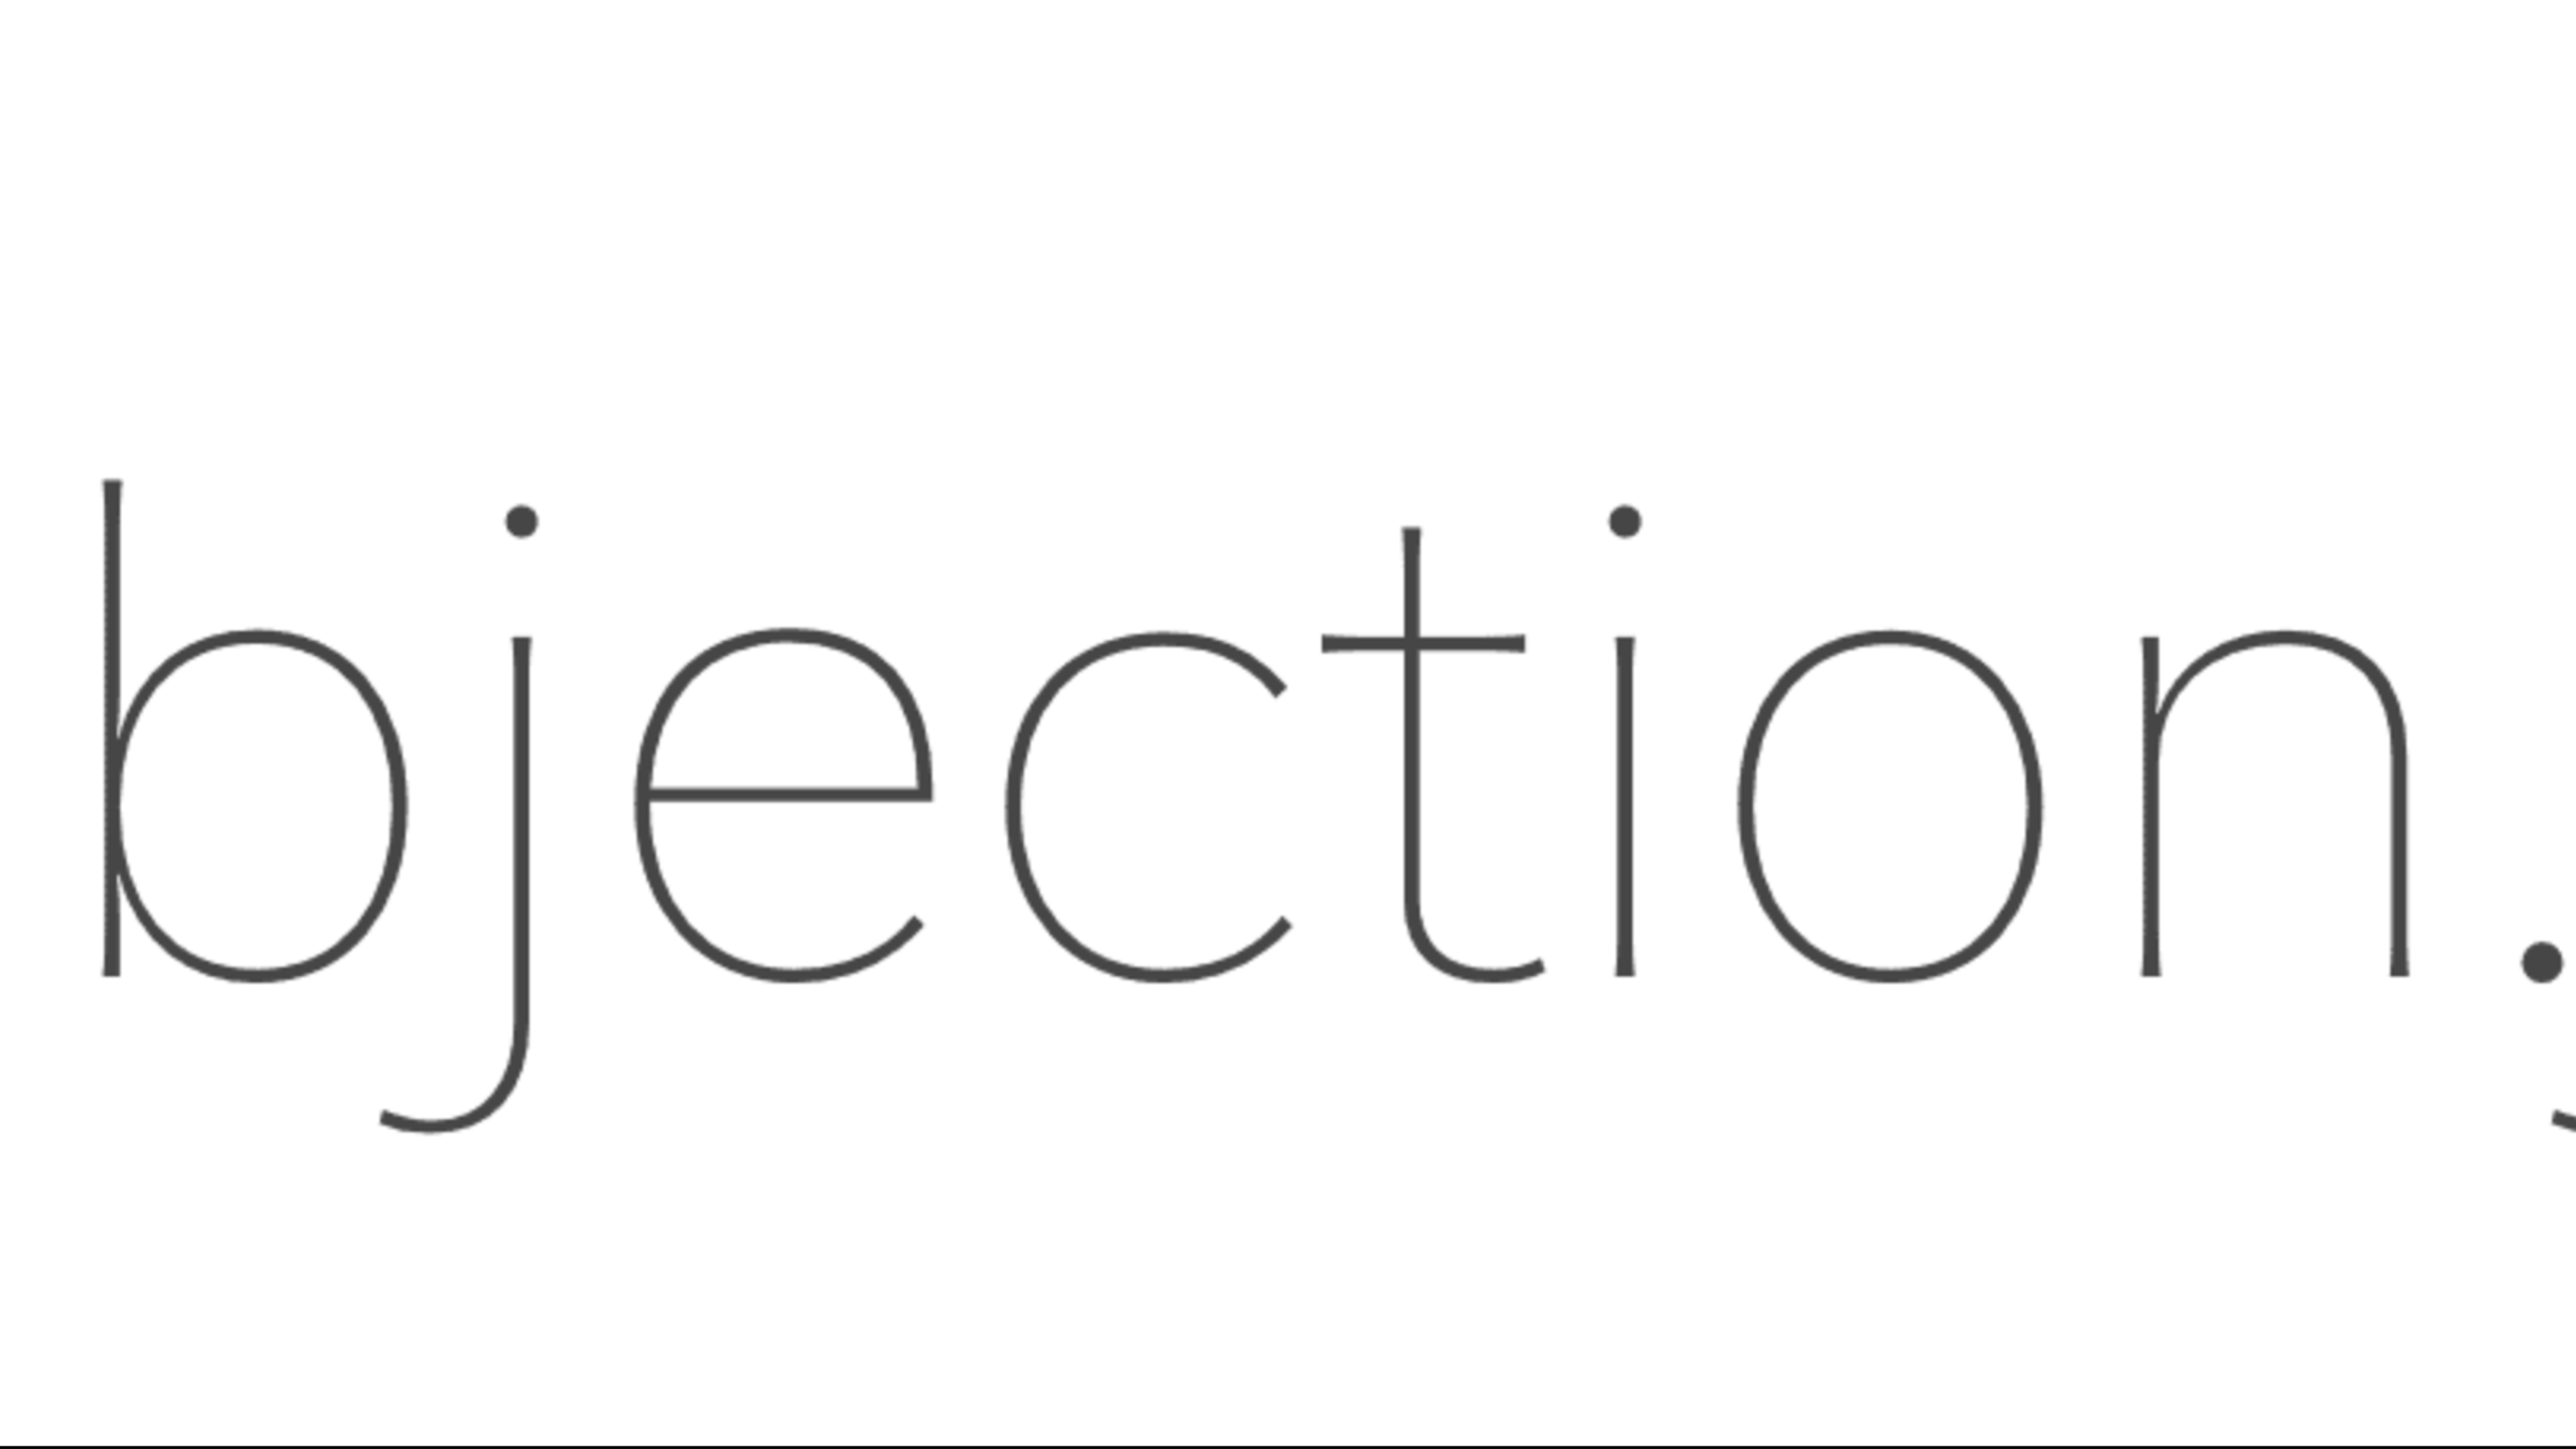 Objection.js as an ORM - Building Relationships